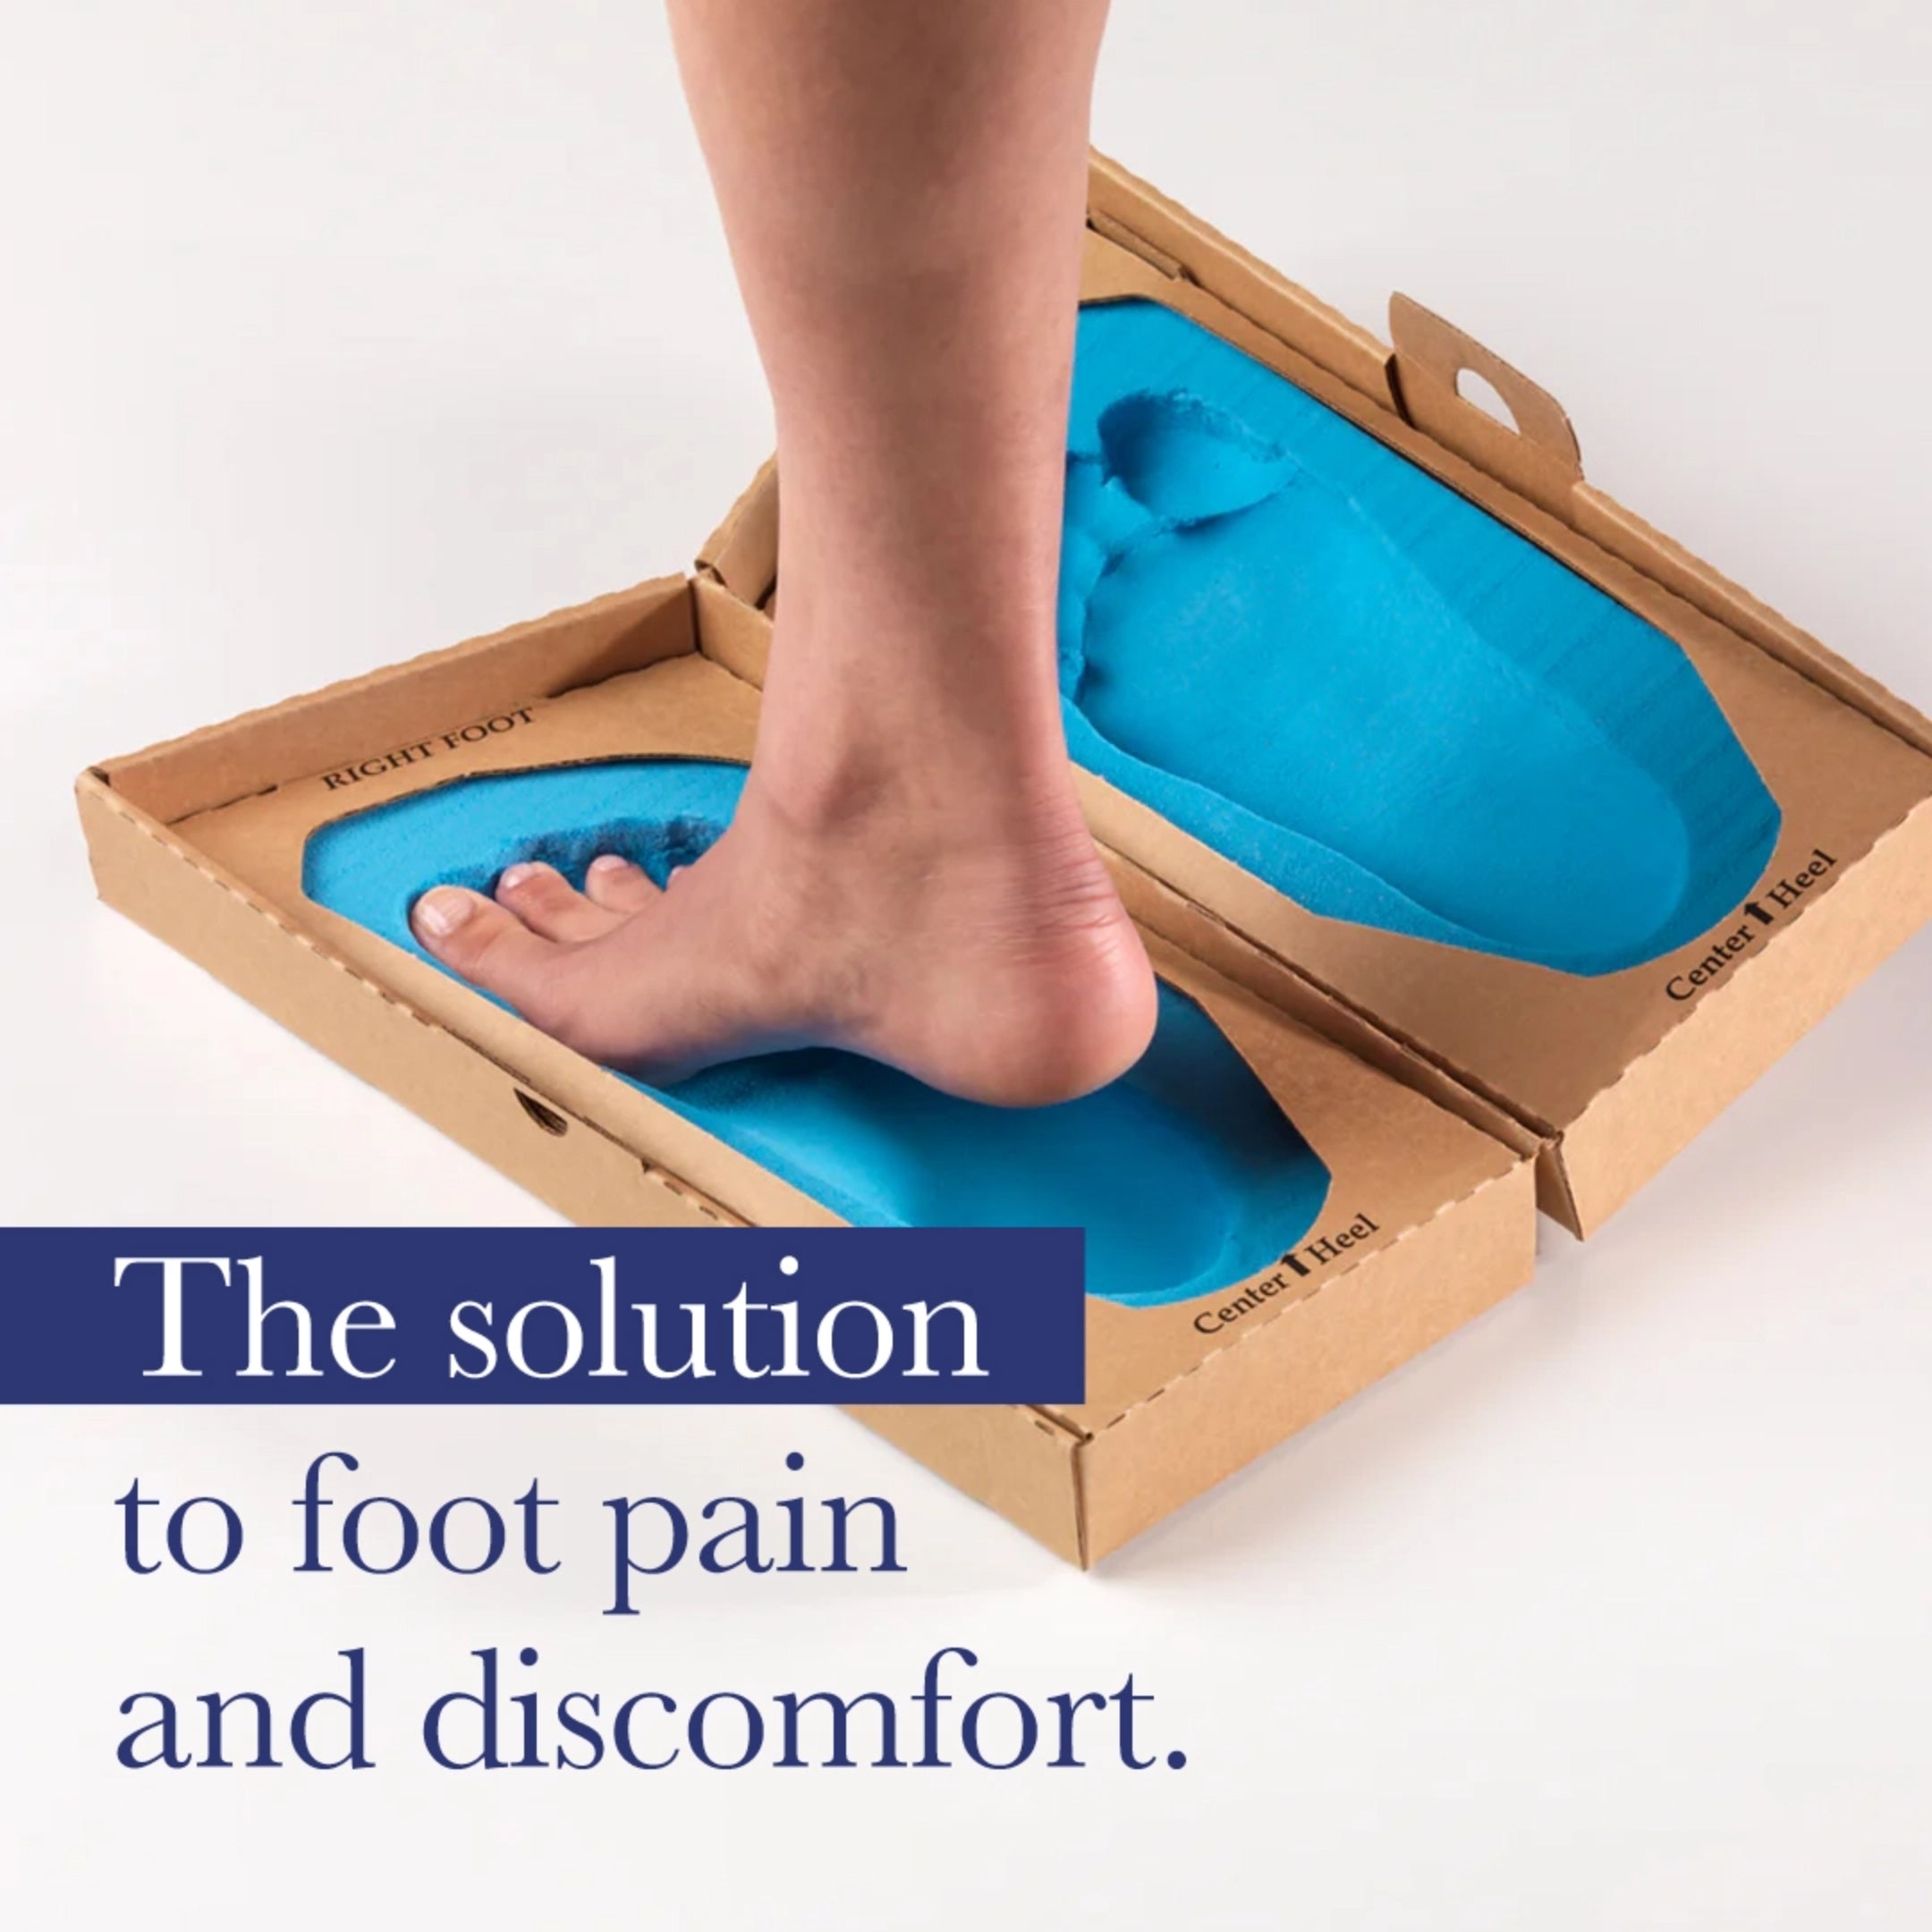 Buy Insole Online & Get Upto 60% OFF at PharmEasy